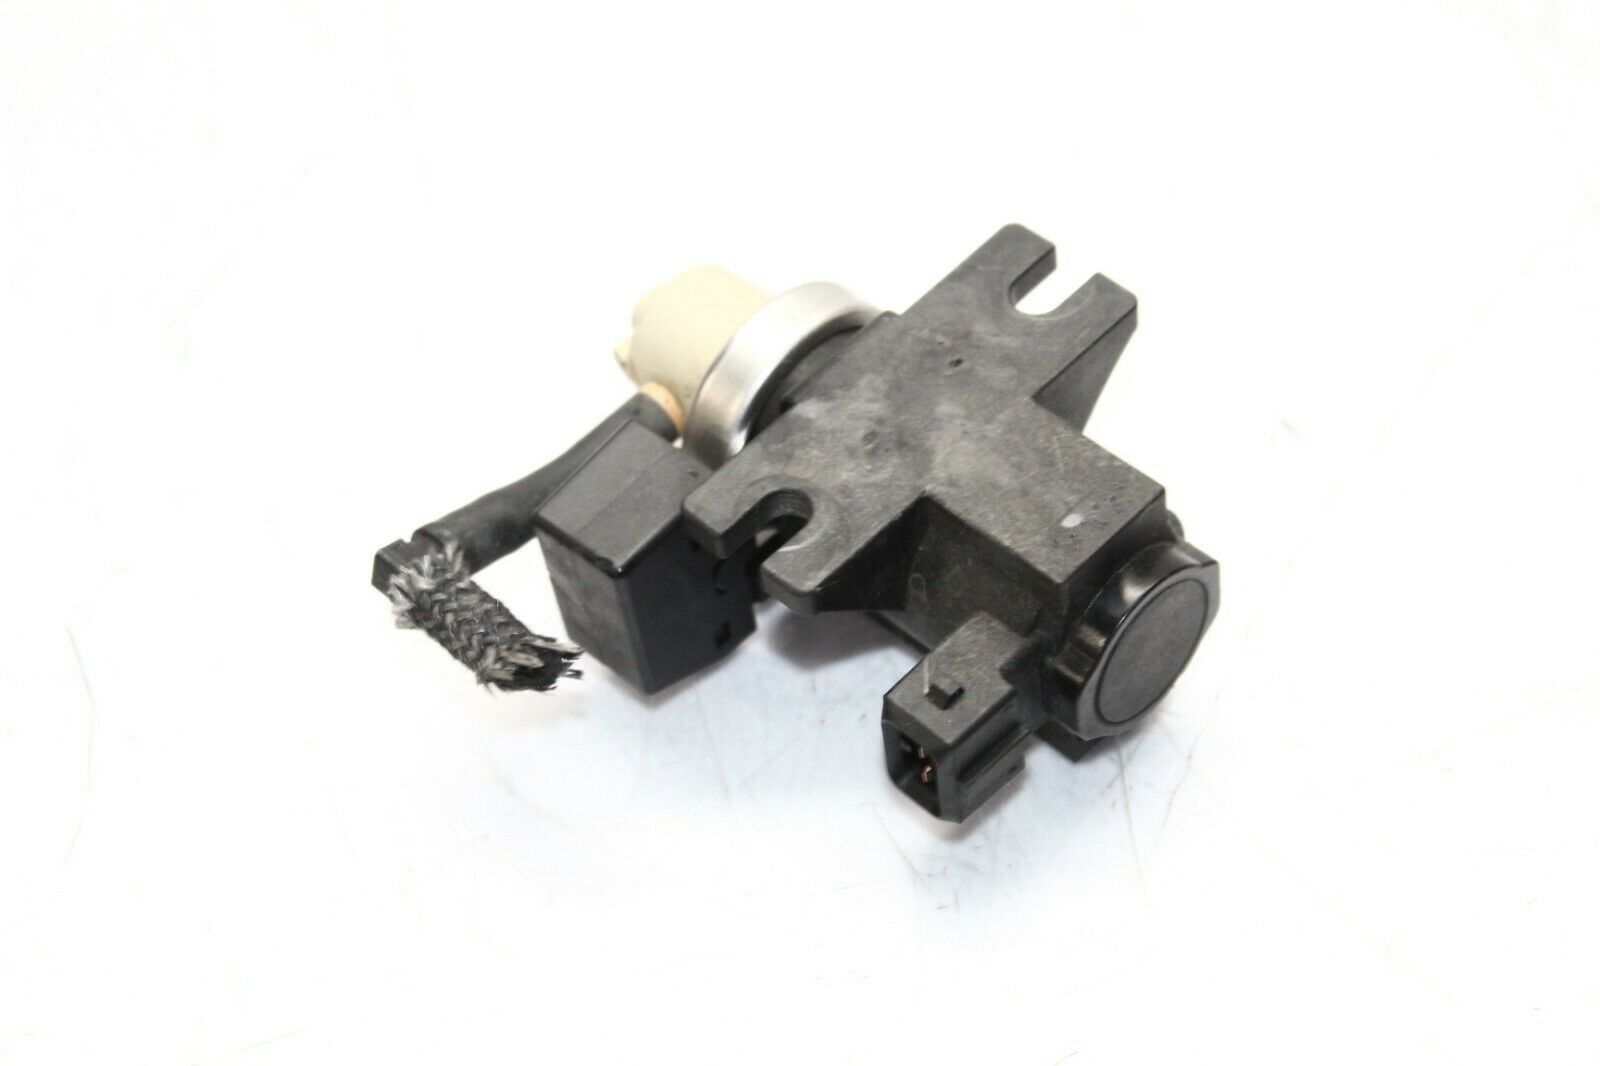 Primary image for 2007-2013 E90 335i TURBO CHARGER AIR INDUCTION PRESSURE CONVERTER P8741